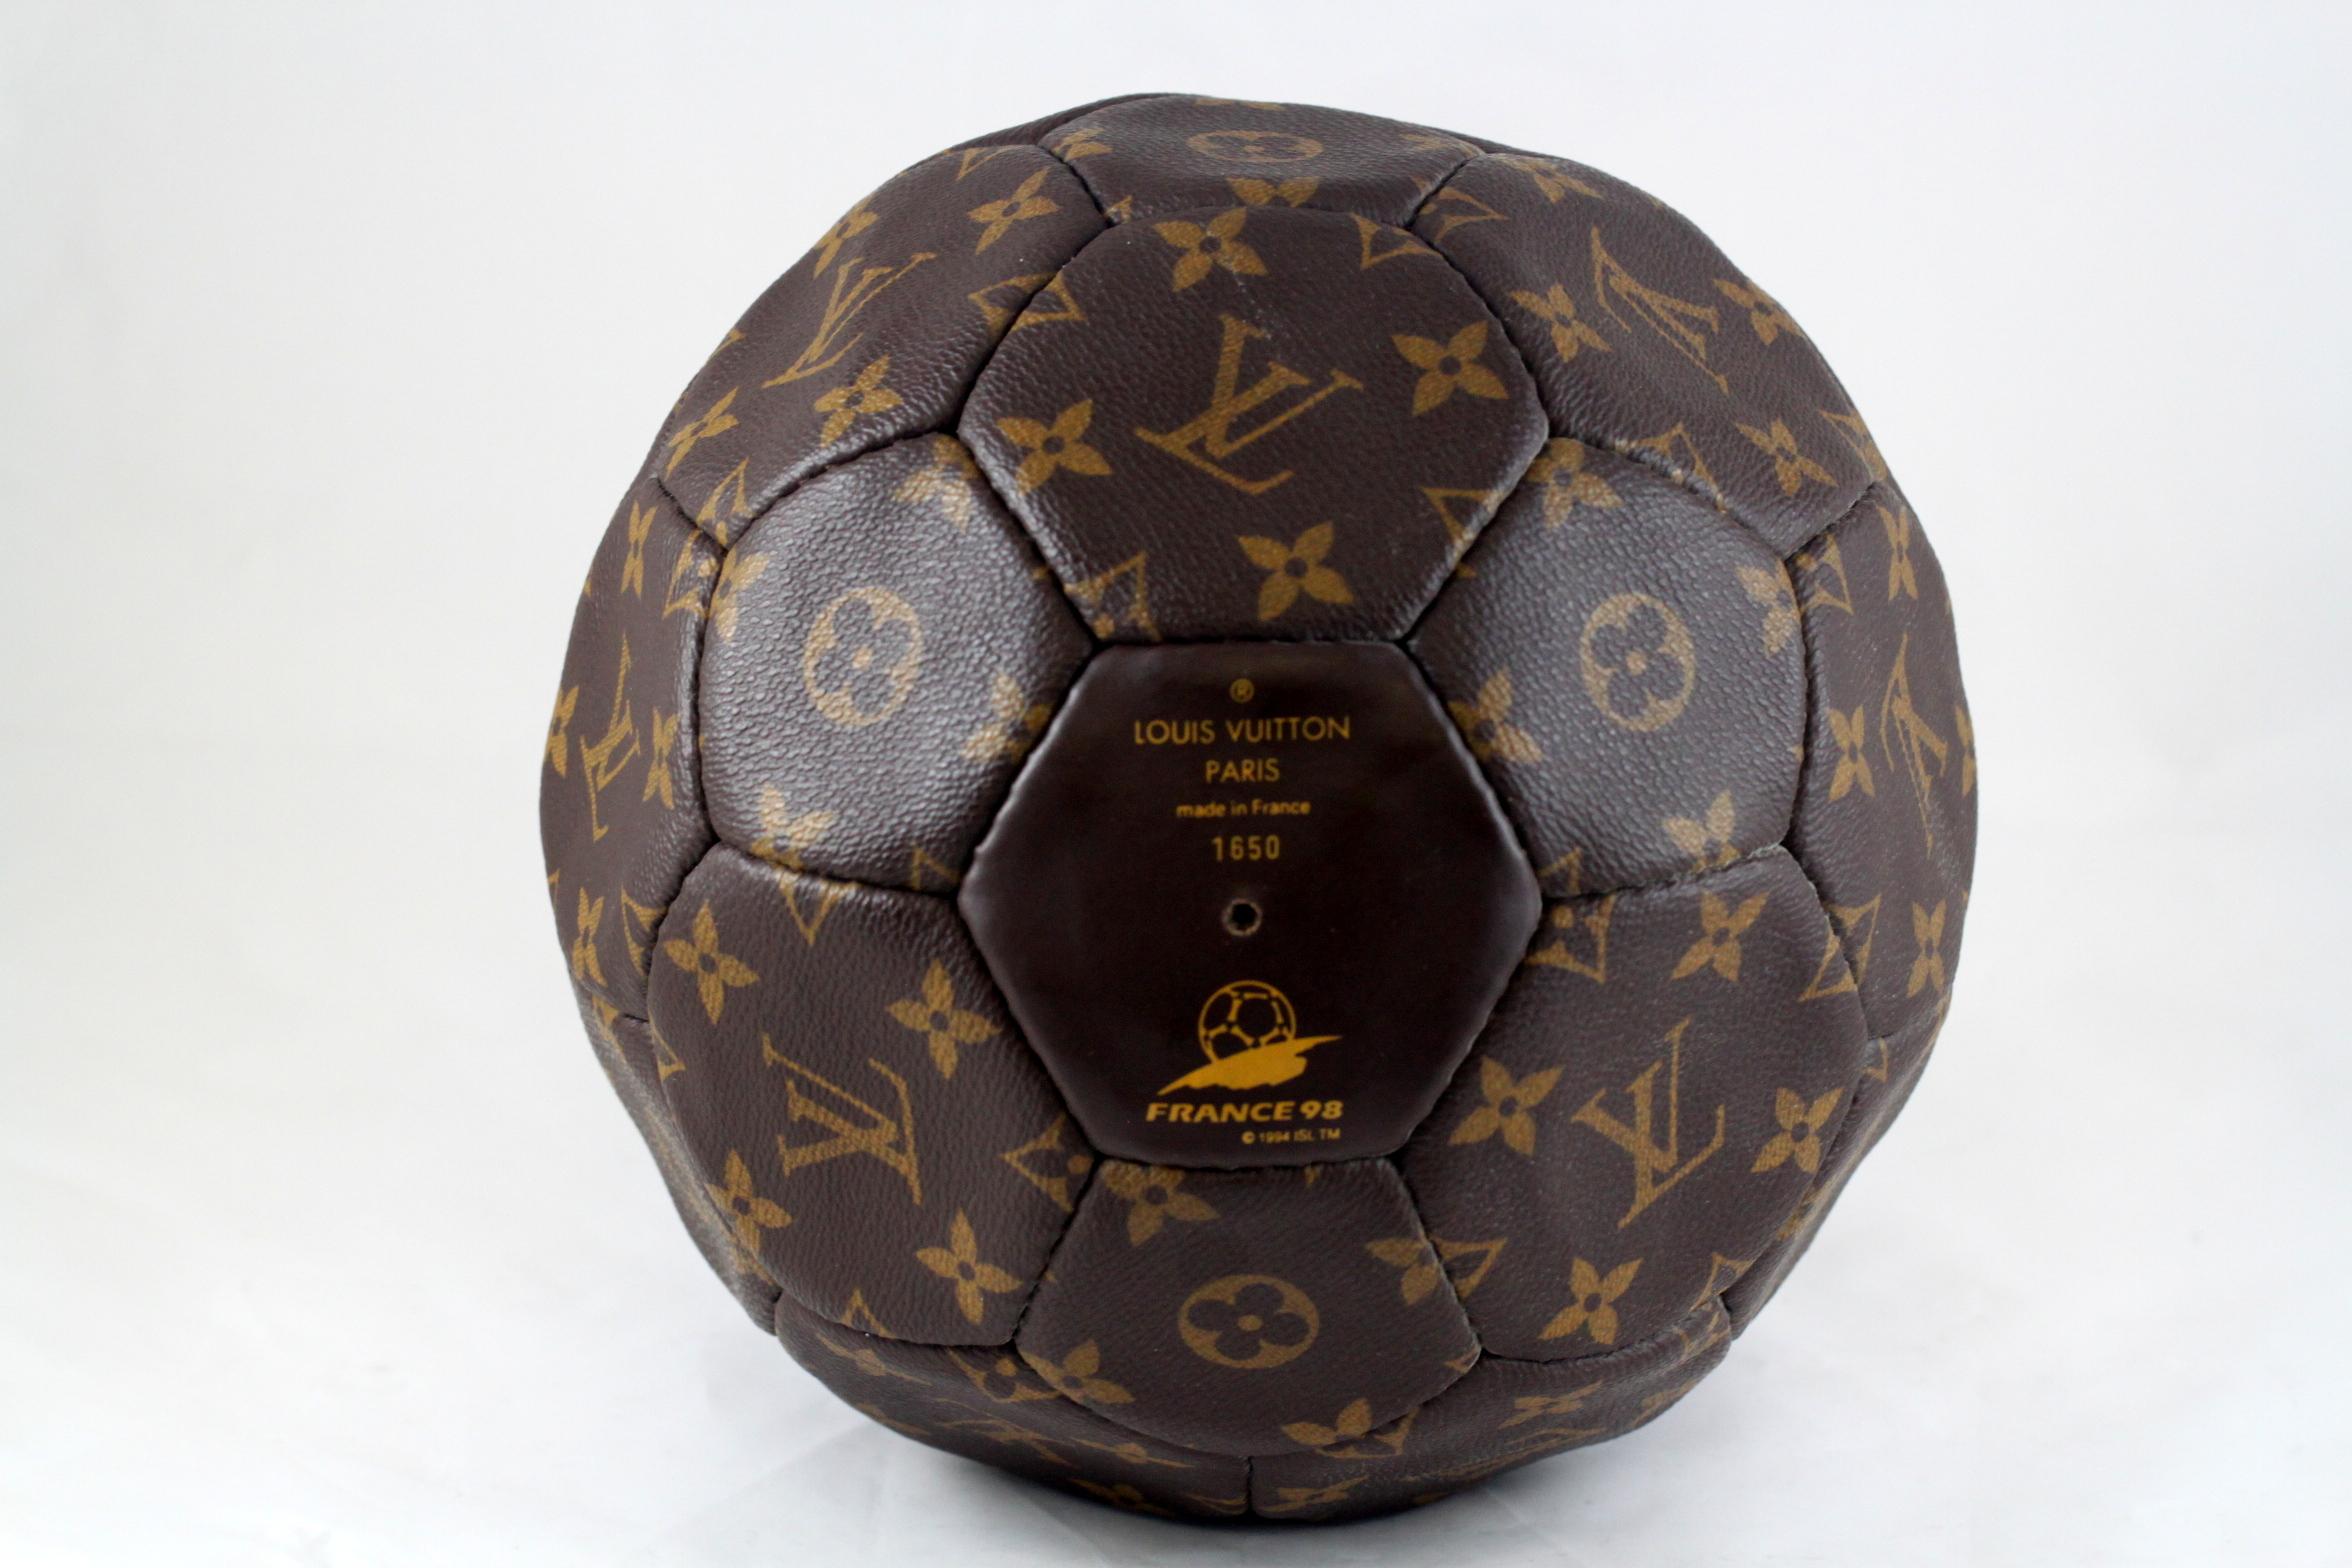 louis vuitton rugby ball price